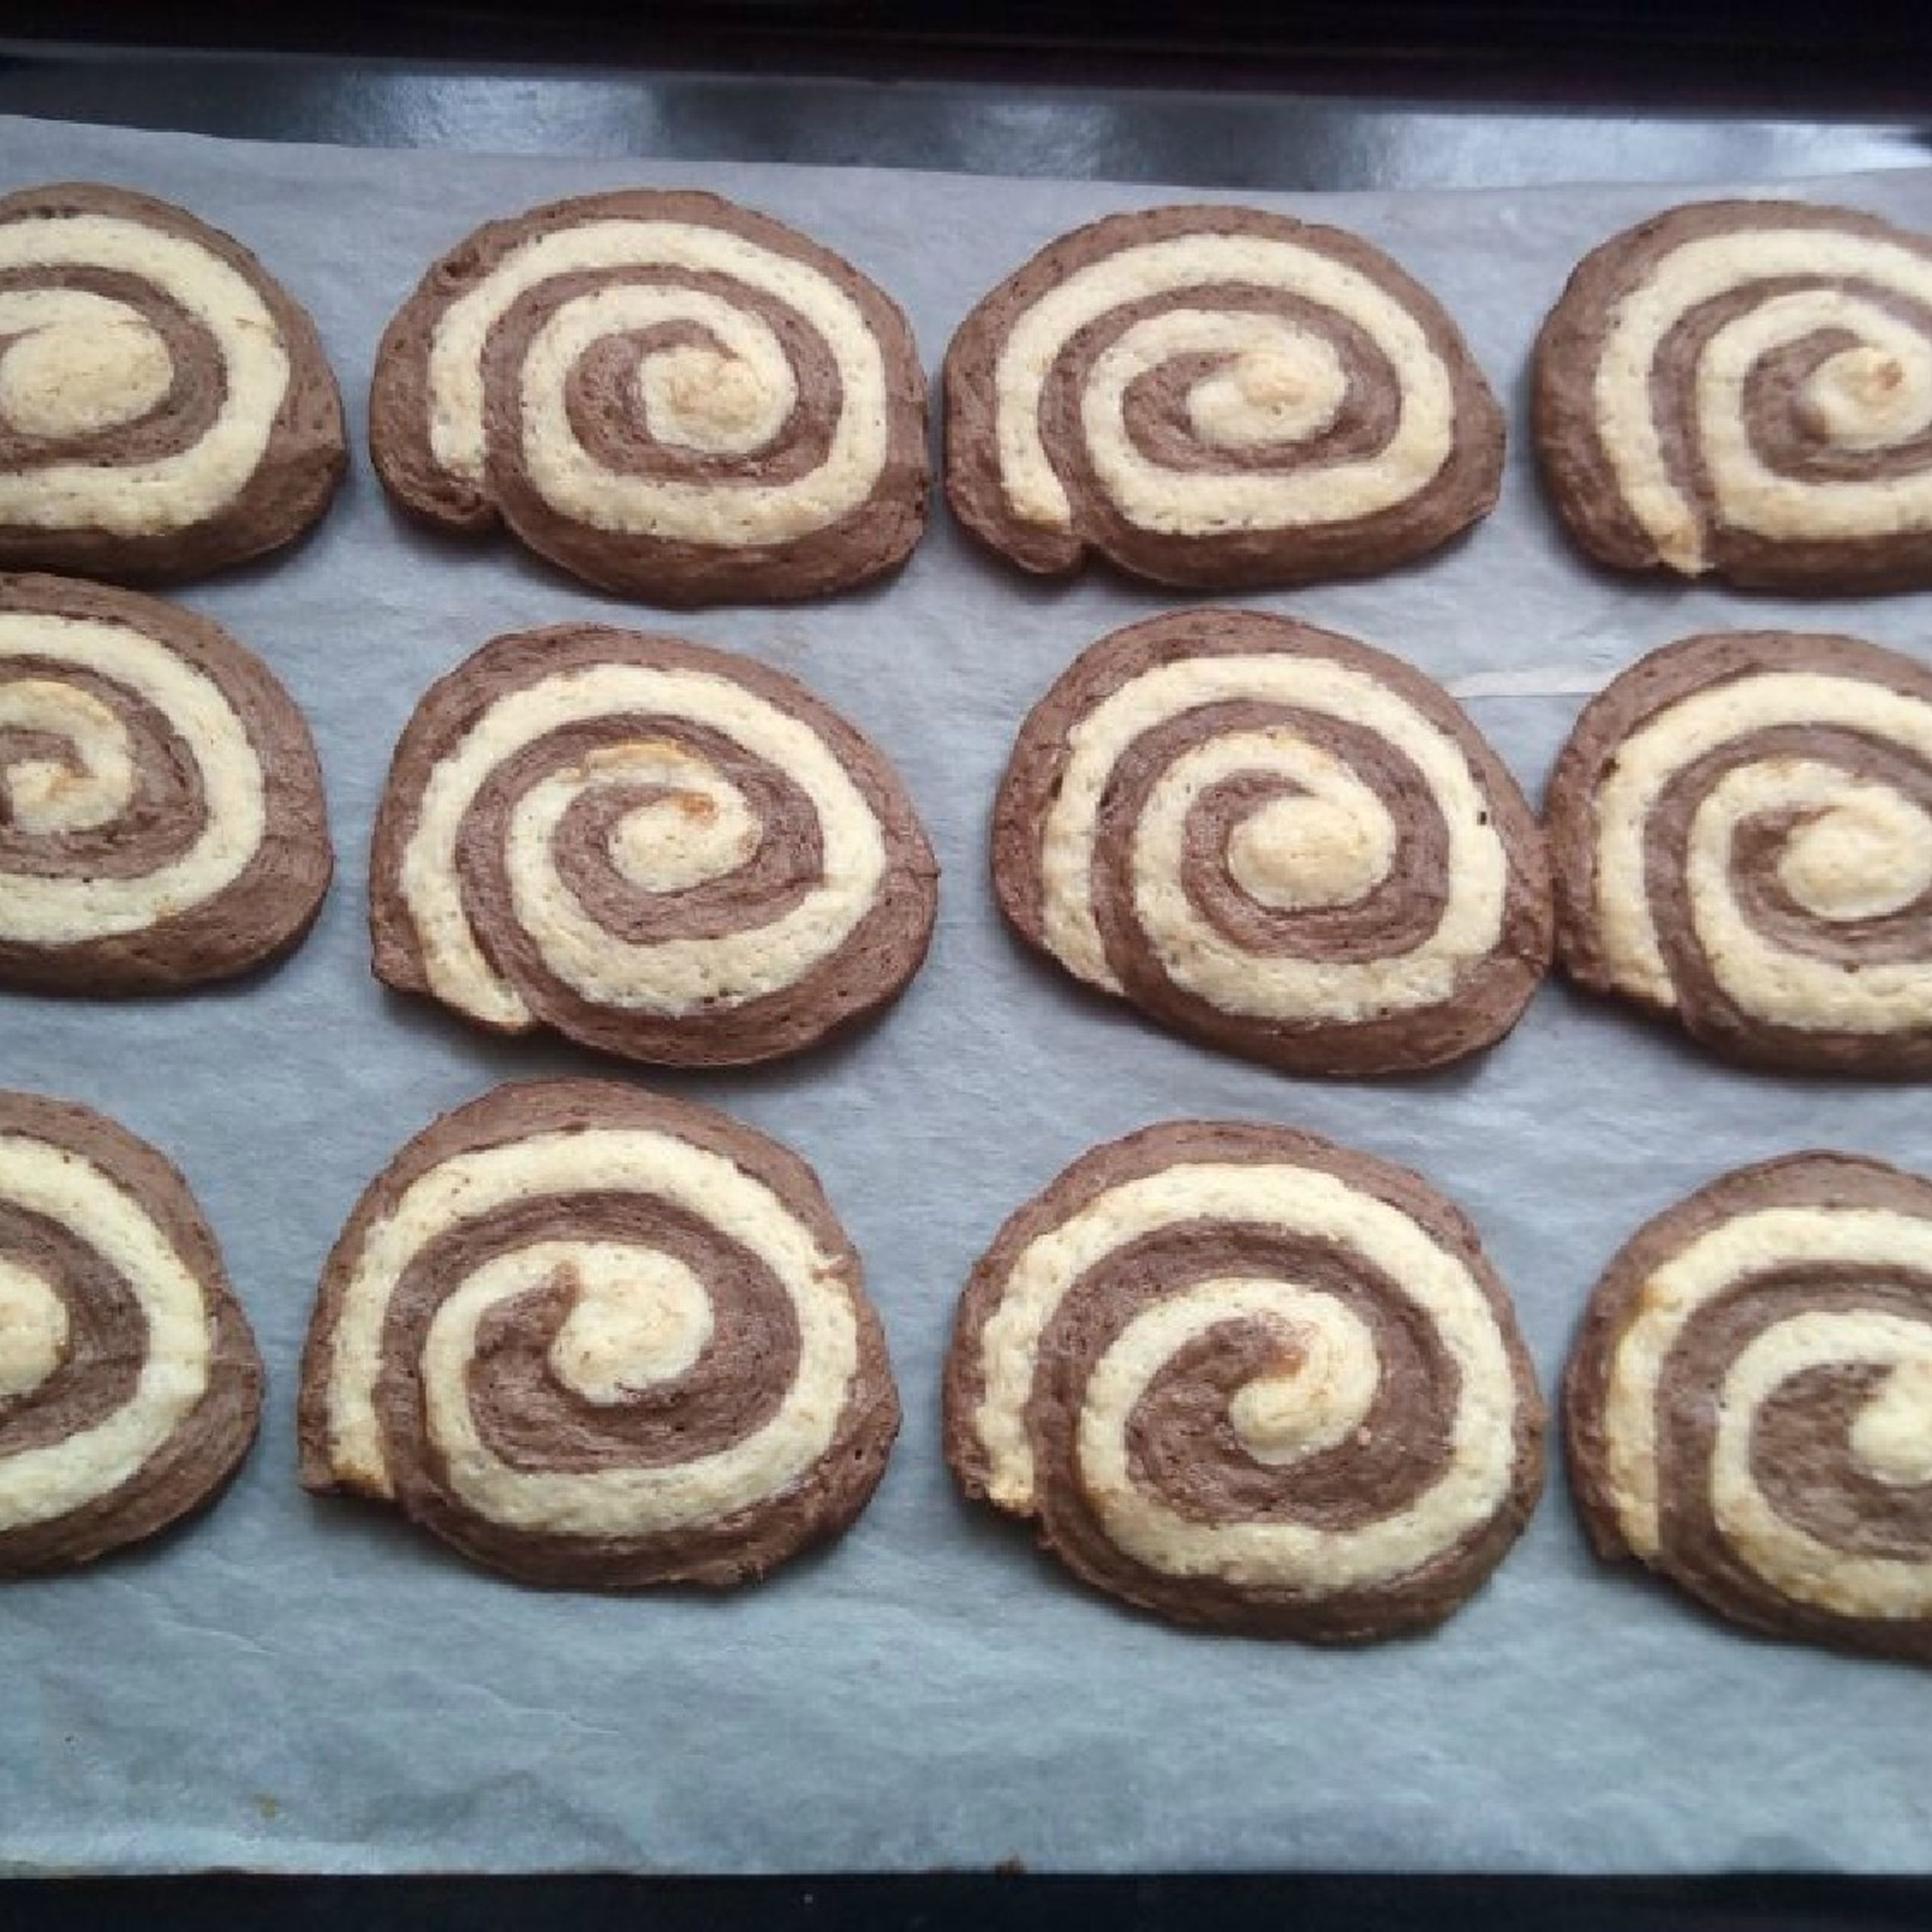 Black and white spiral cookies